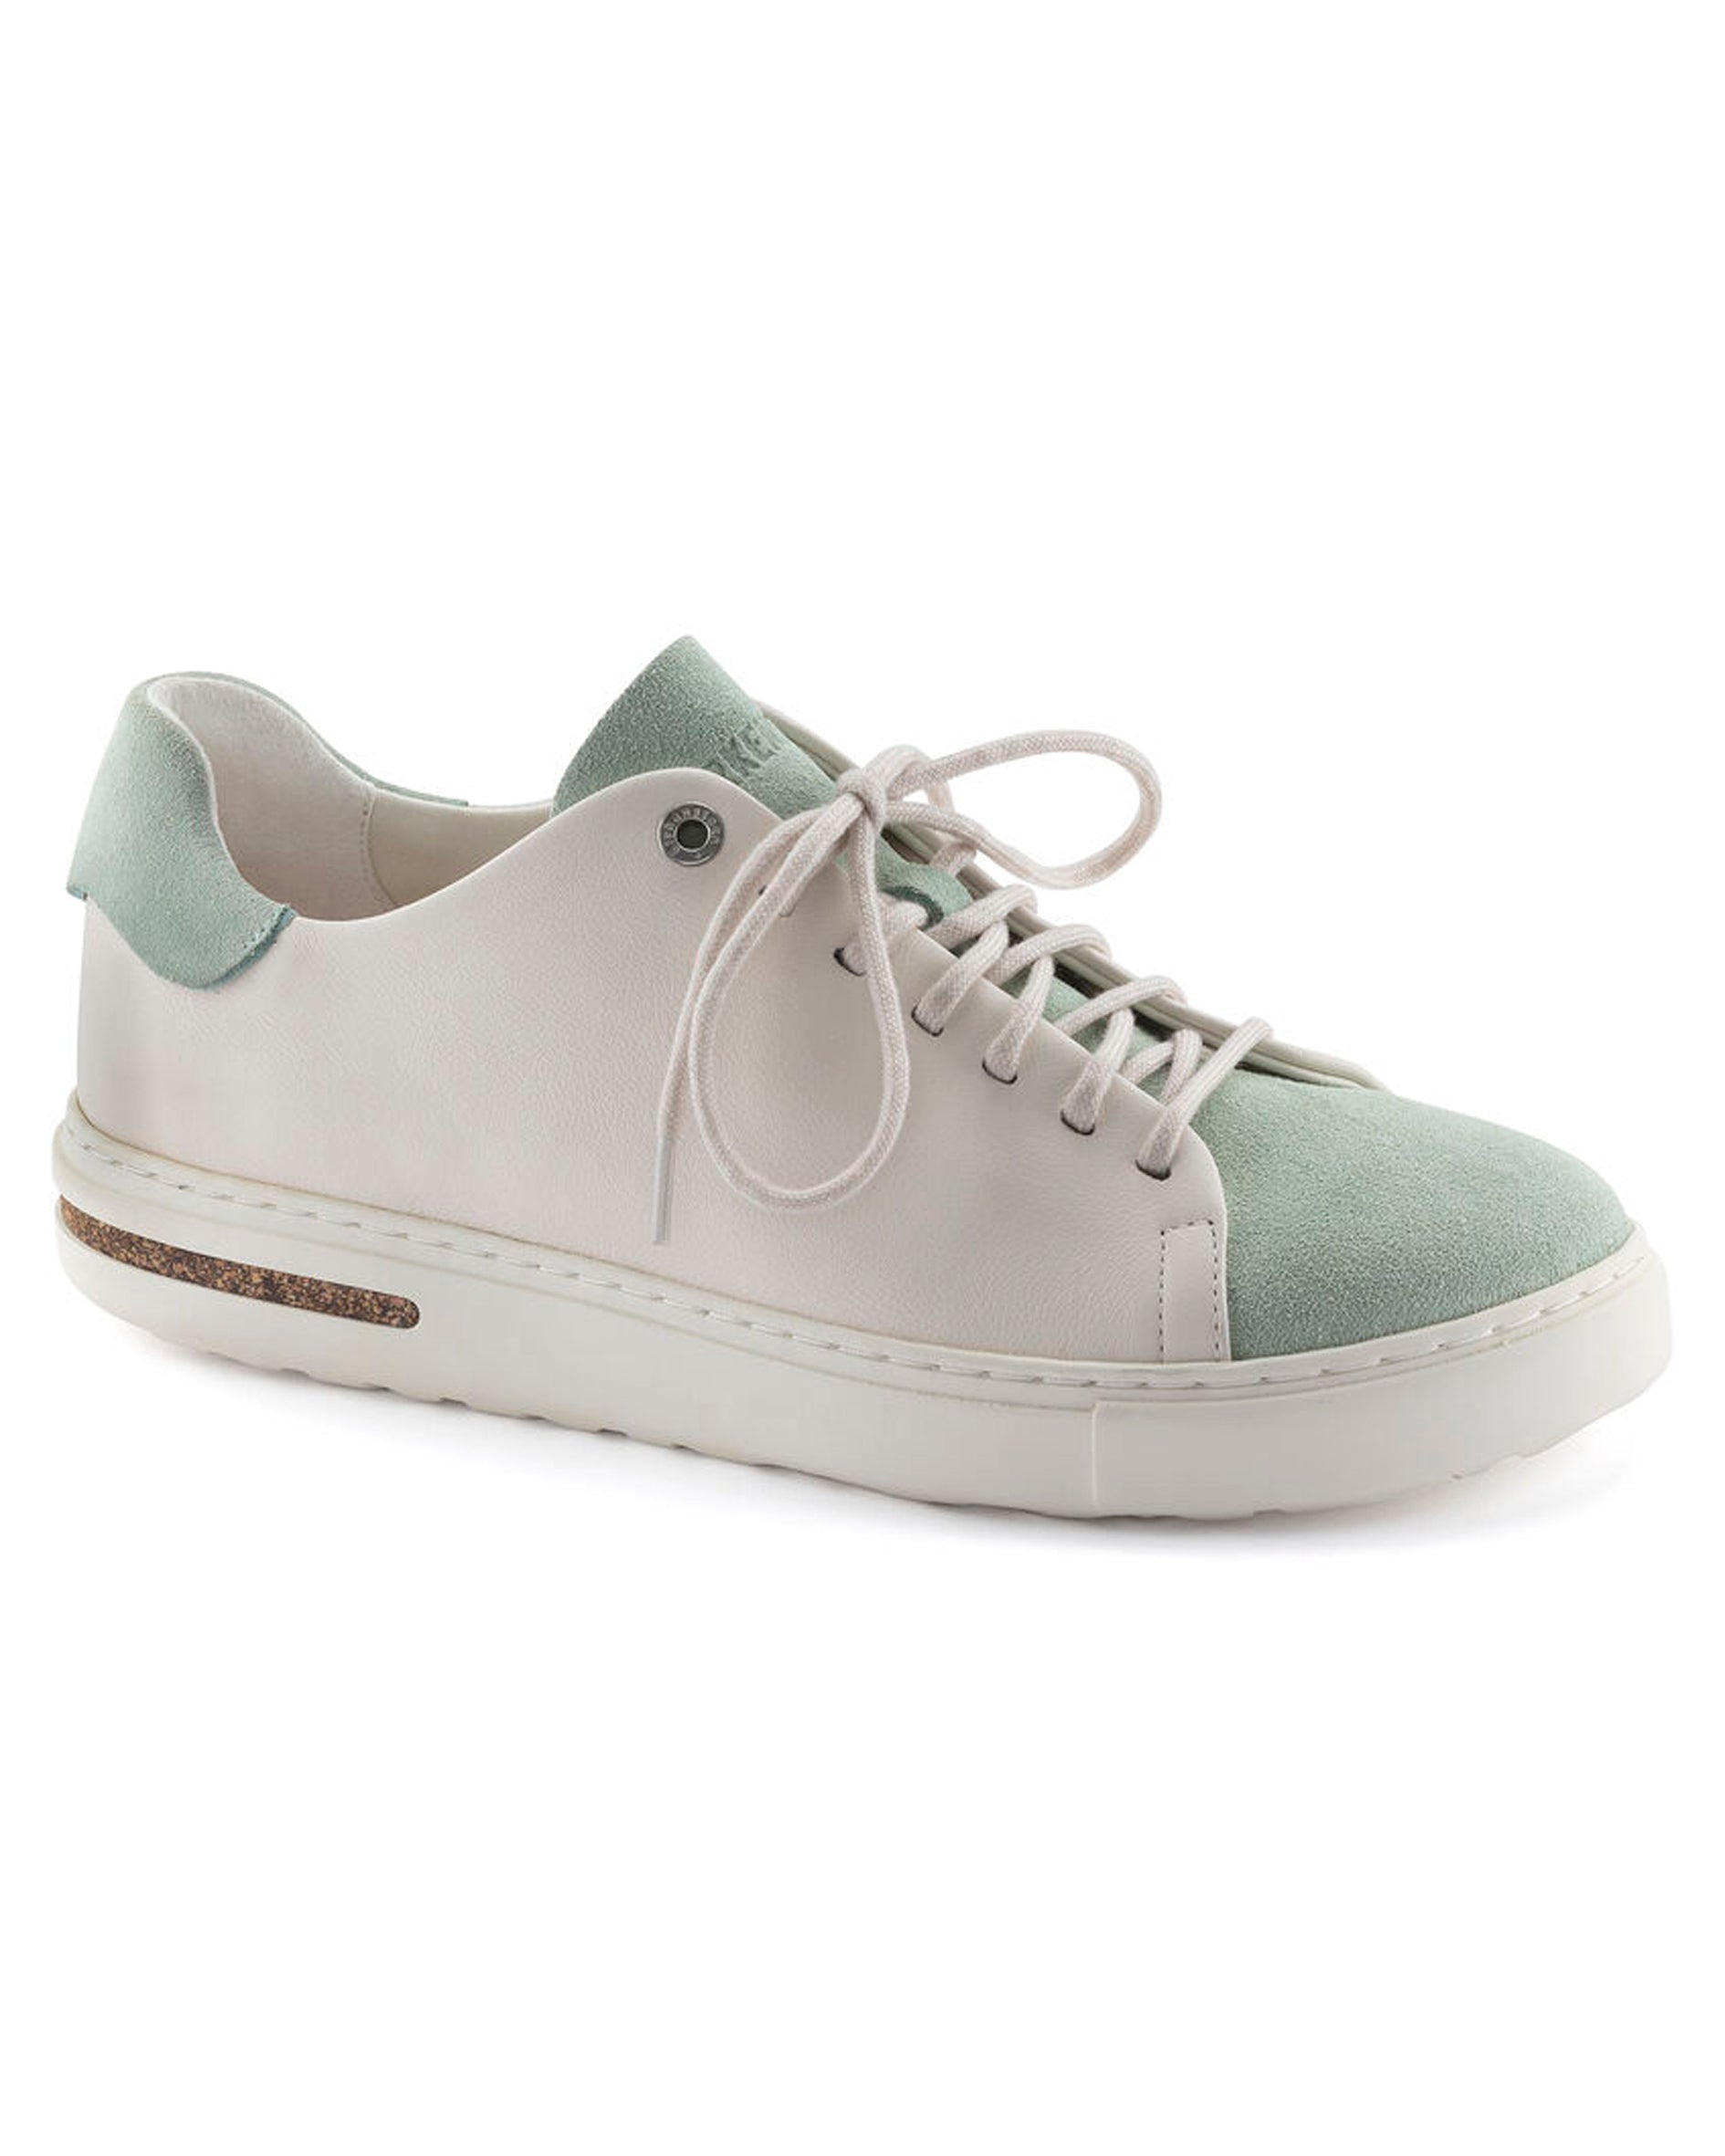 Bend Low Decon Pop Eggshell Matcha Leather Shoes